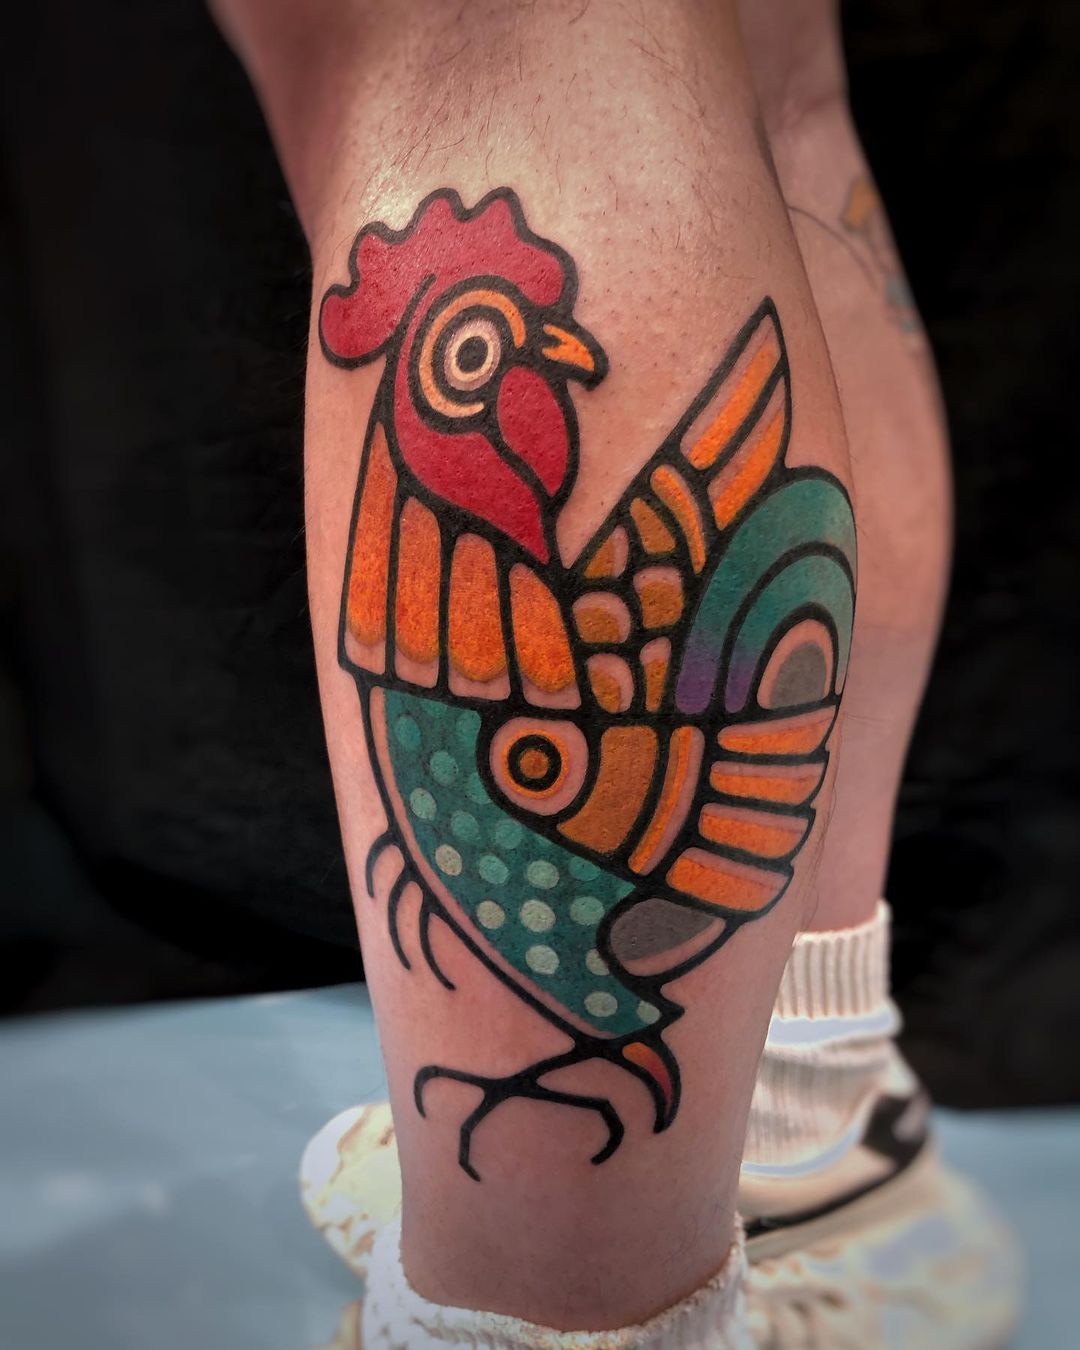 Outer Limits Tattoo  Piercing on Instagram Dont be a chicken  and  take a good long look at this fight scene by andrewbtattooer          andrewbtattooer tattoos tattoo 